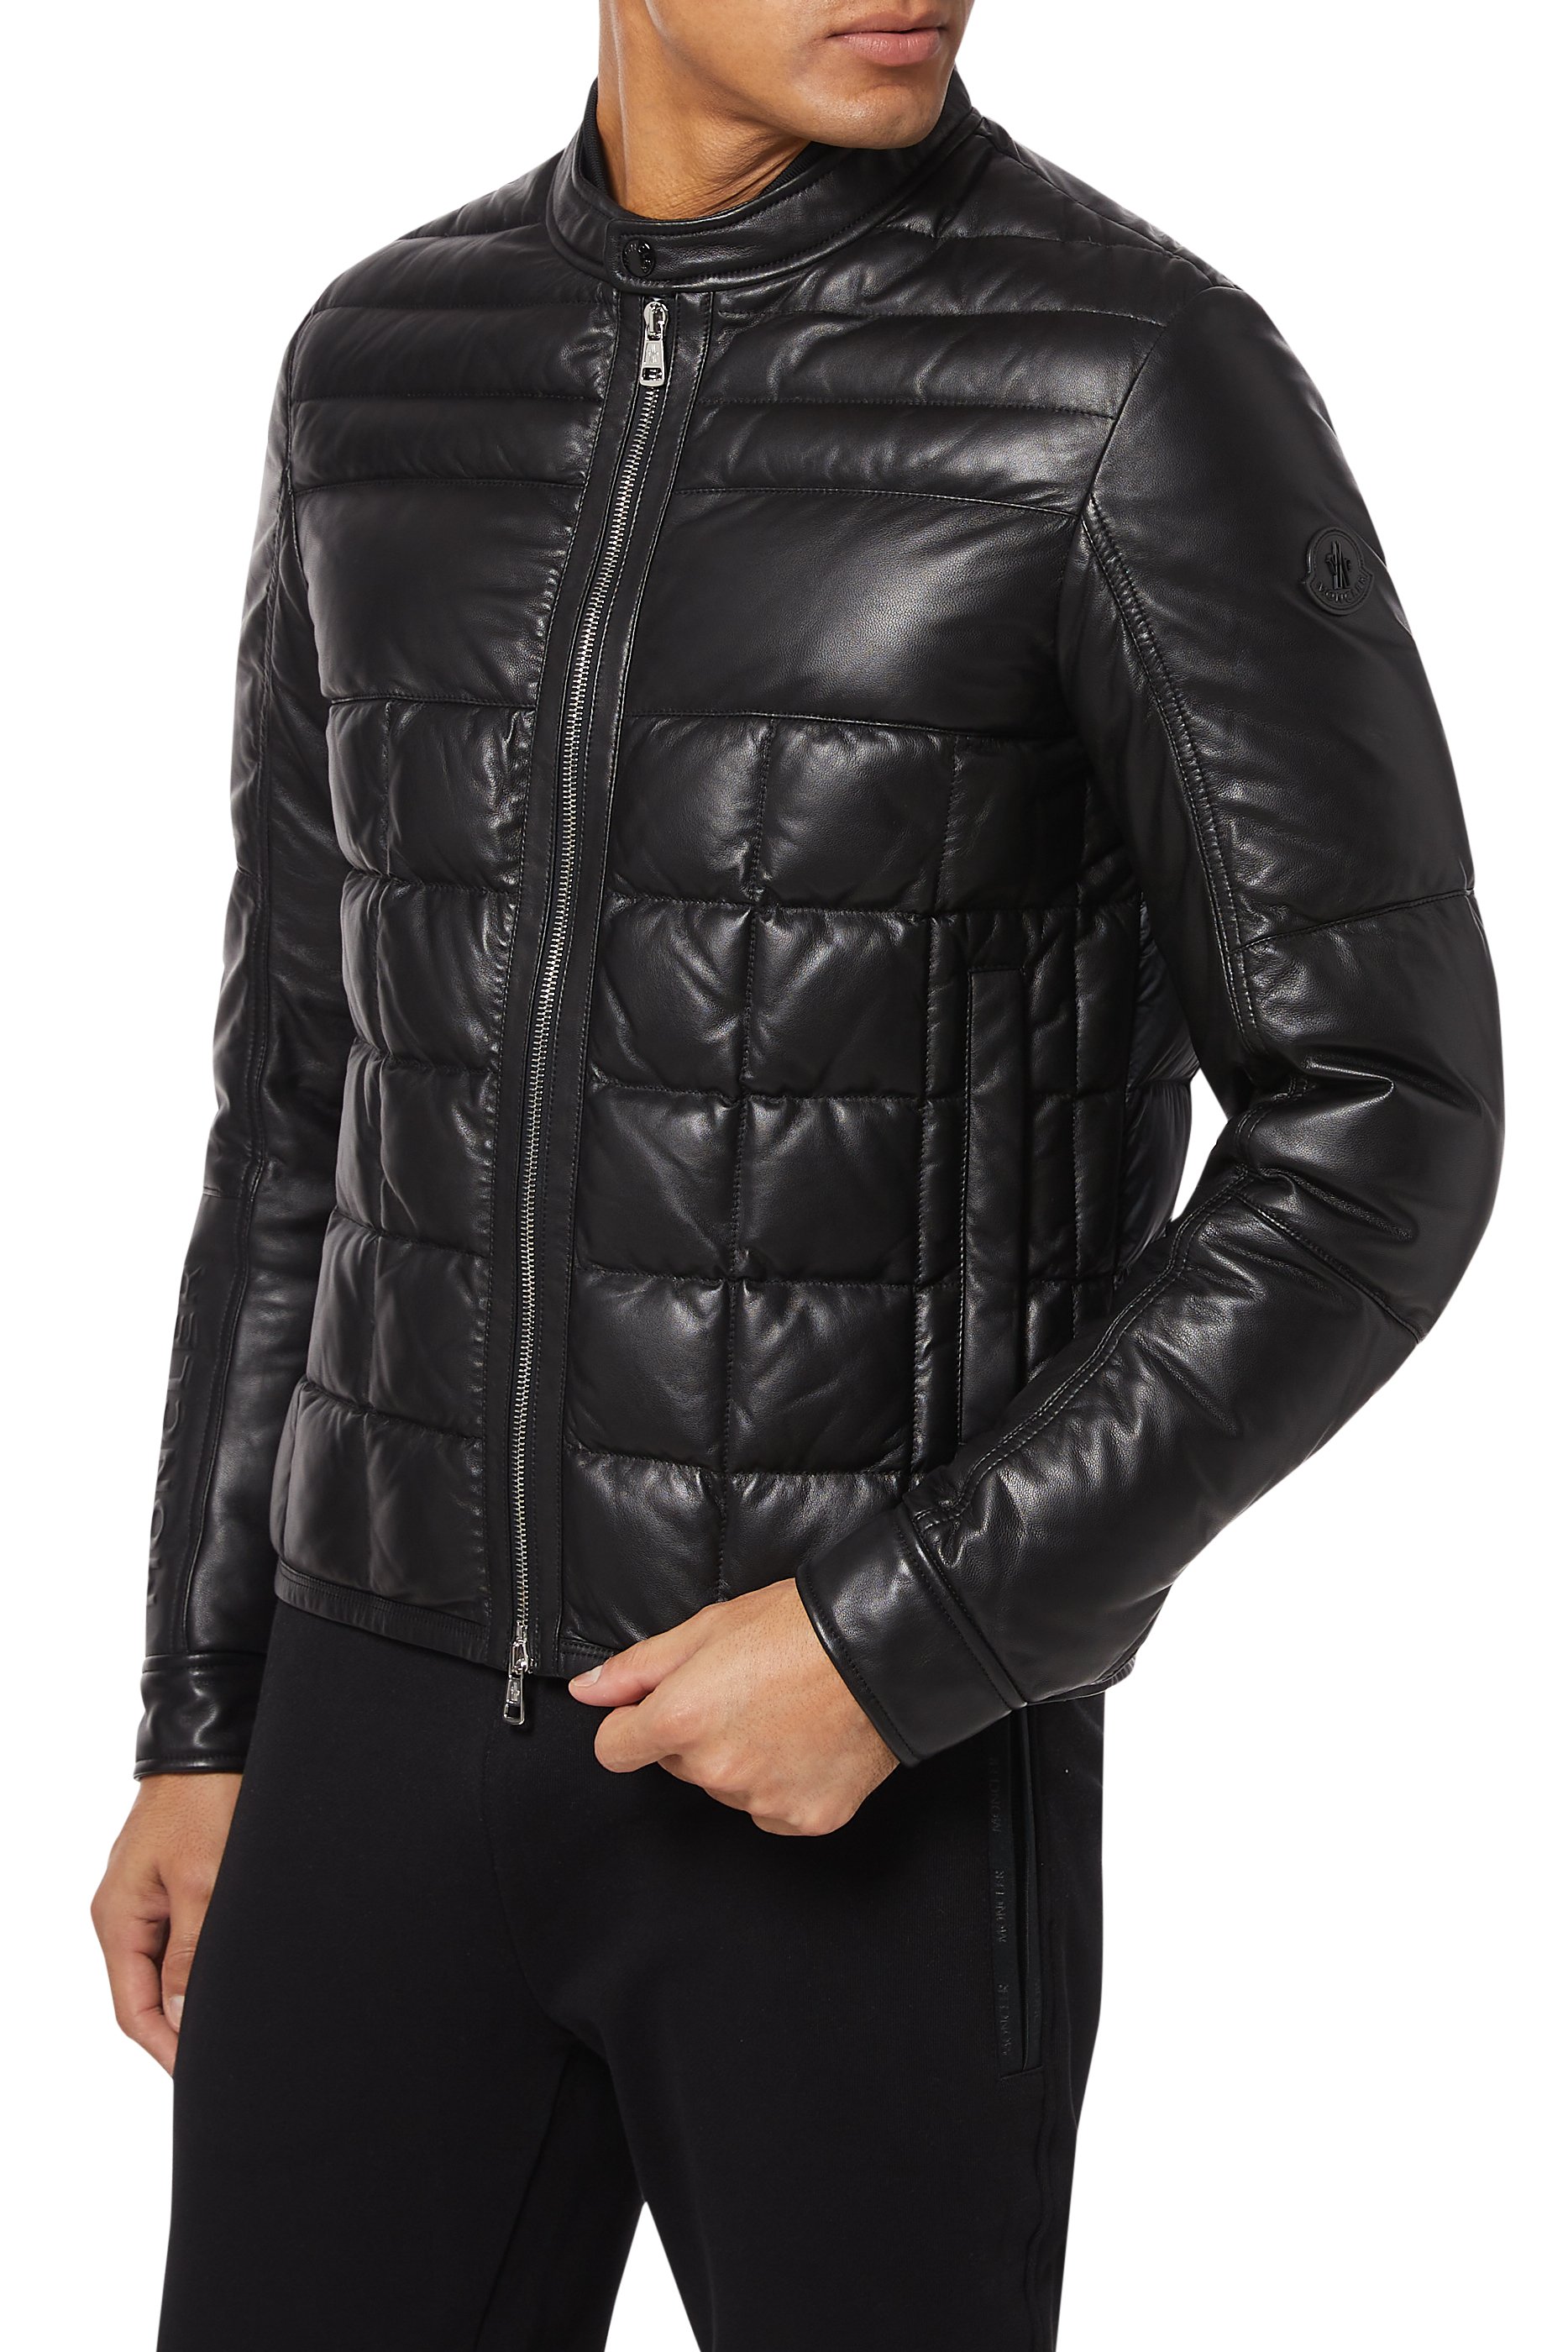 Buy Moncler Trionphe Quilted Leather Biker Jacket - Mens for AED 12065. ...